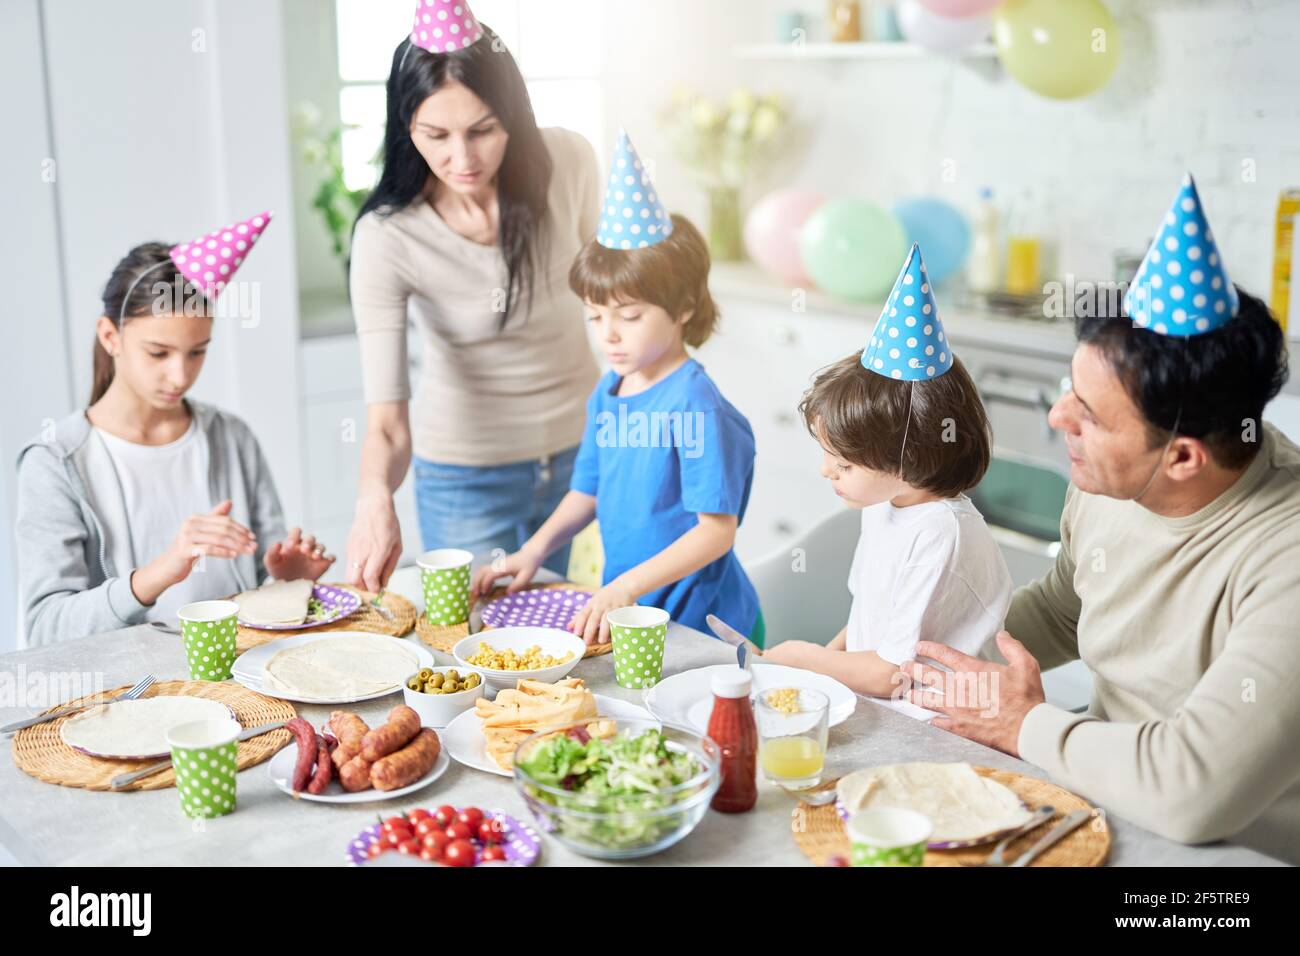 Preparation. Caring latin middle aged mother serving her family while they having dinner, celebrating birthday together at home Stock Photo